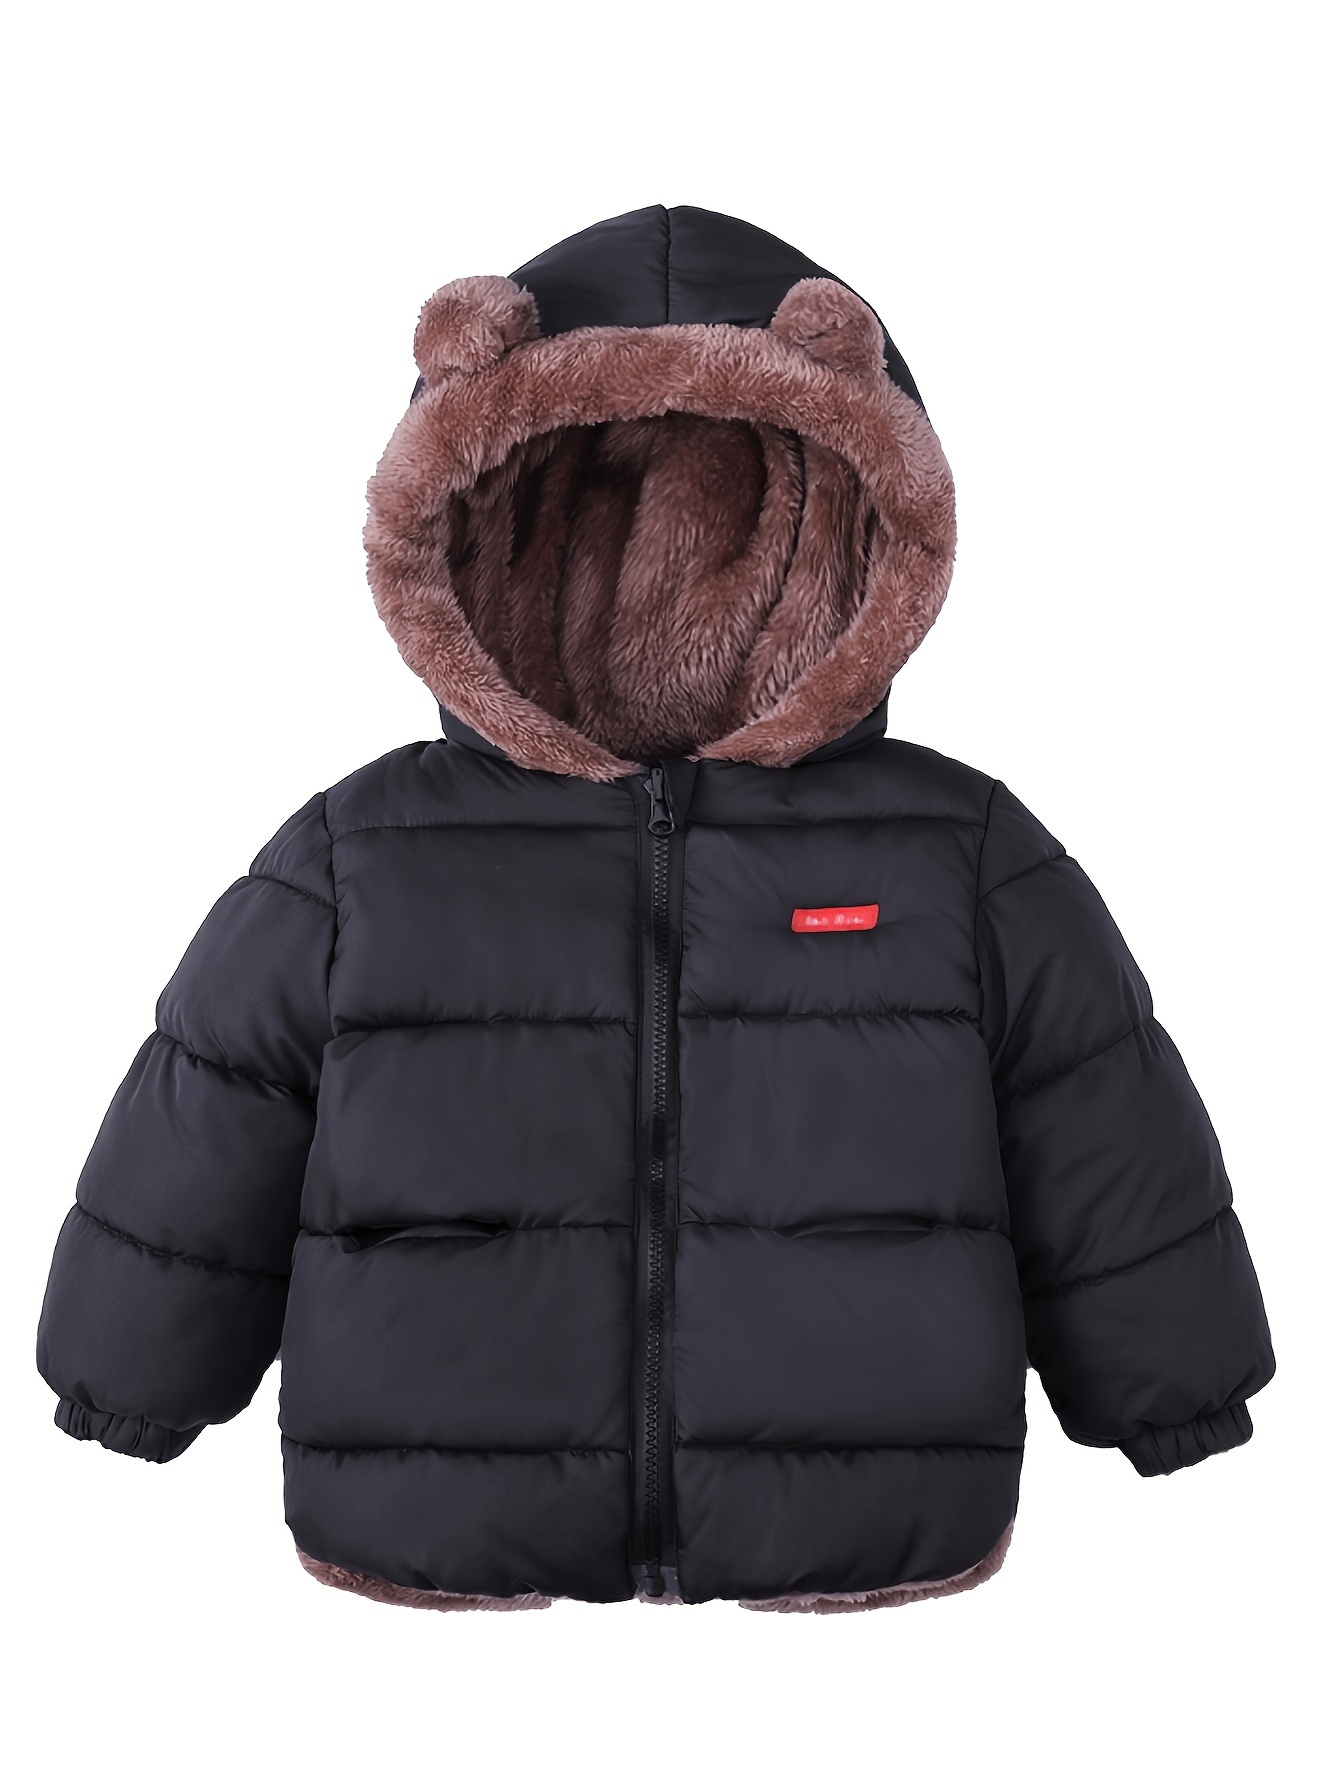 Winter Coats Toddler Baby Boys Girls Warm Lined Thick Jacket